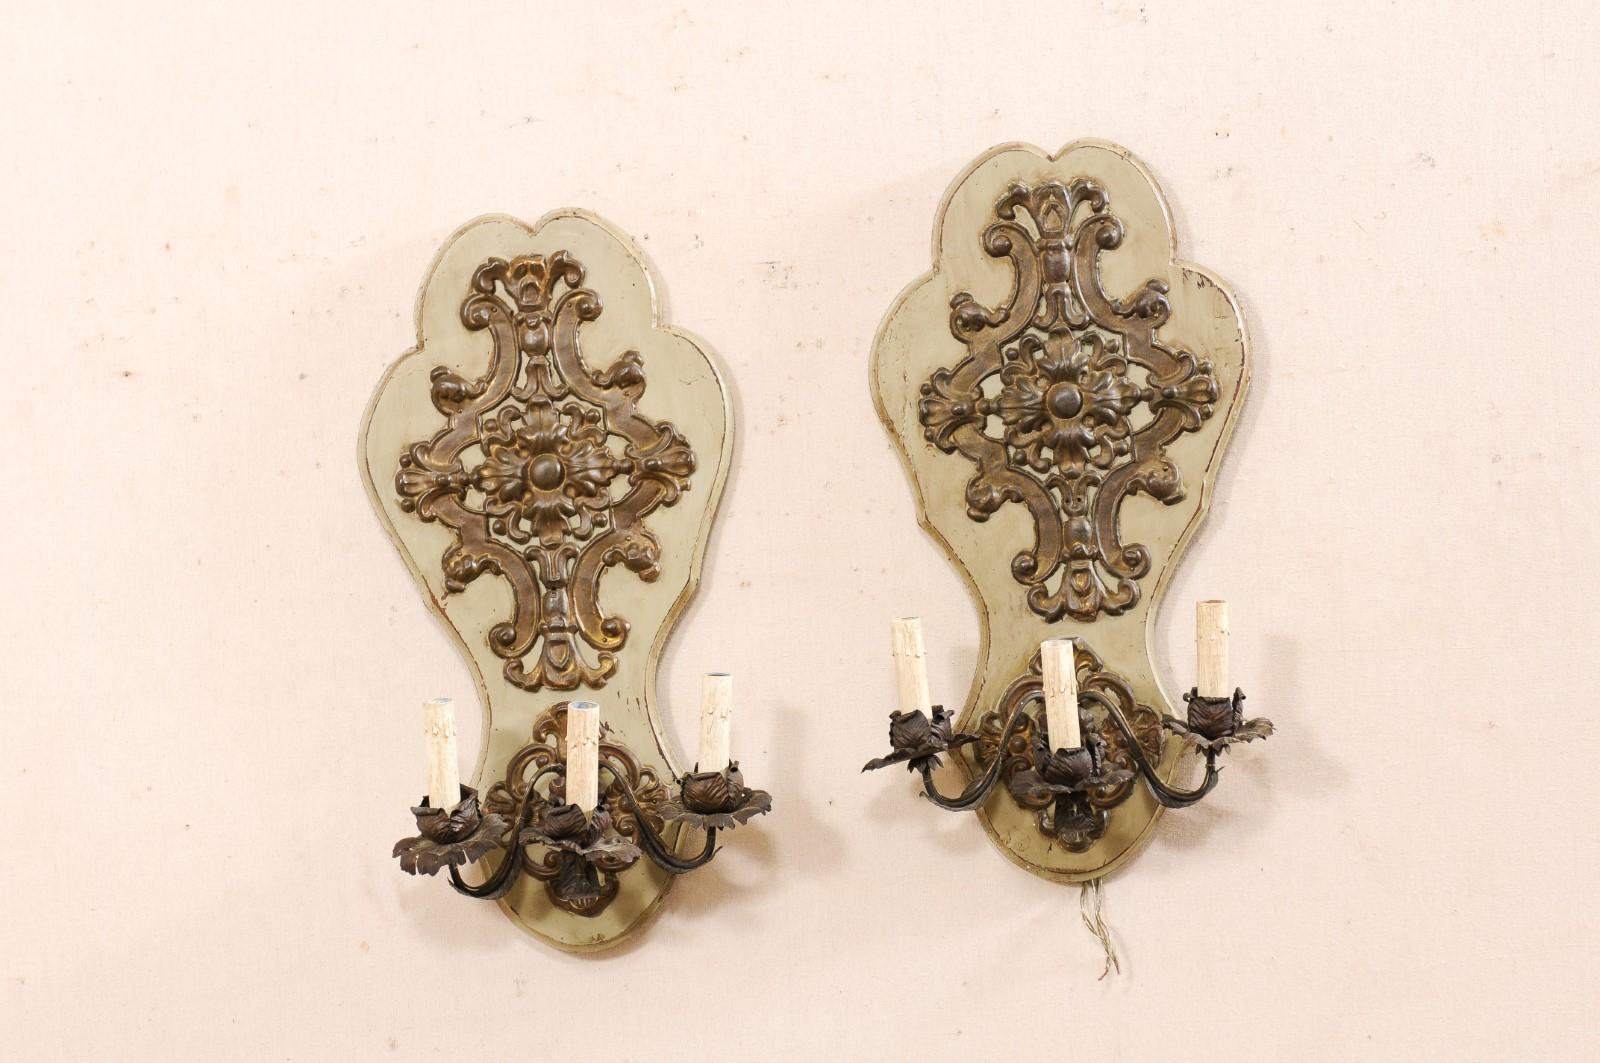 A French pair of 19th century sconces mounted on shapely carved and painted wood back-plates. This antique pair of sconces from France have been fashioned from 19th century brass/metal fixtures consisting of elaborately designed metal plaques, metal